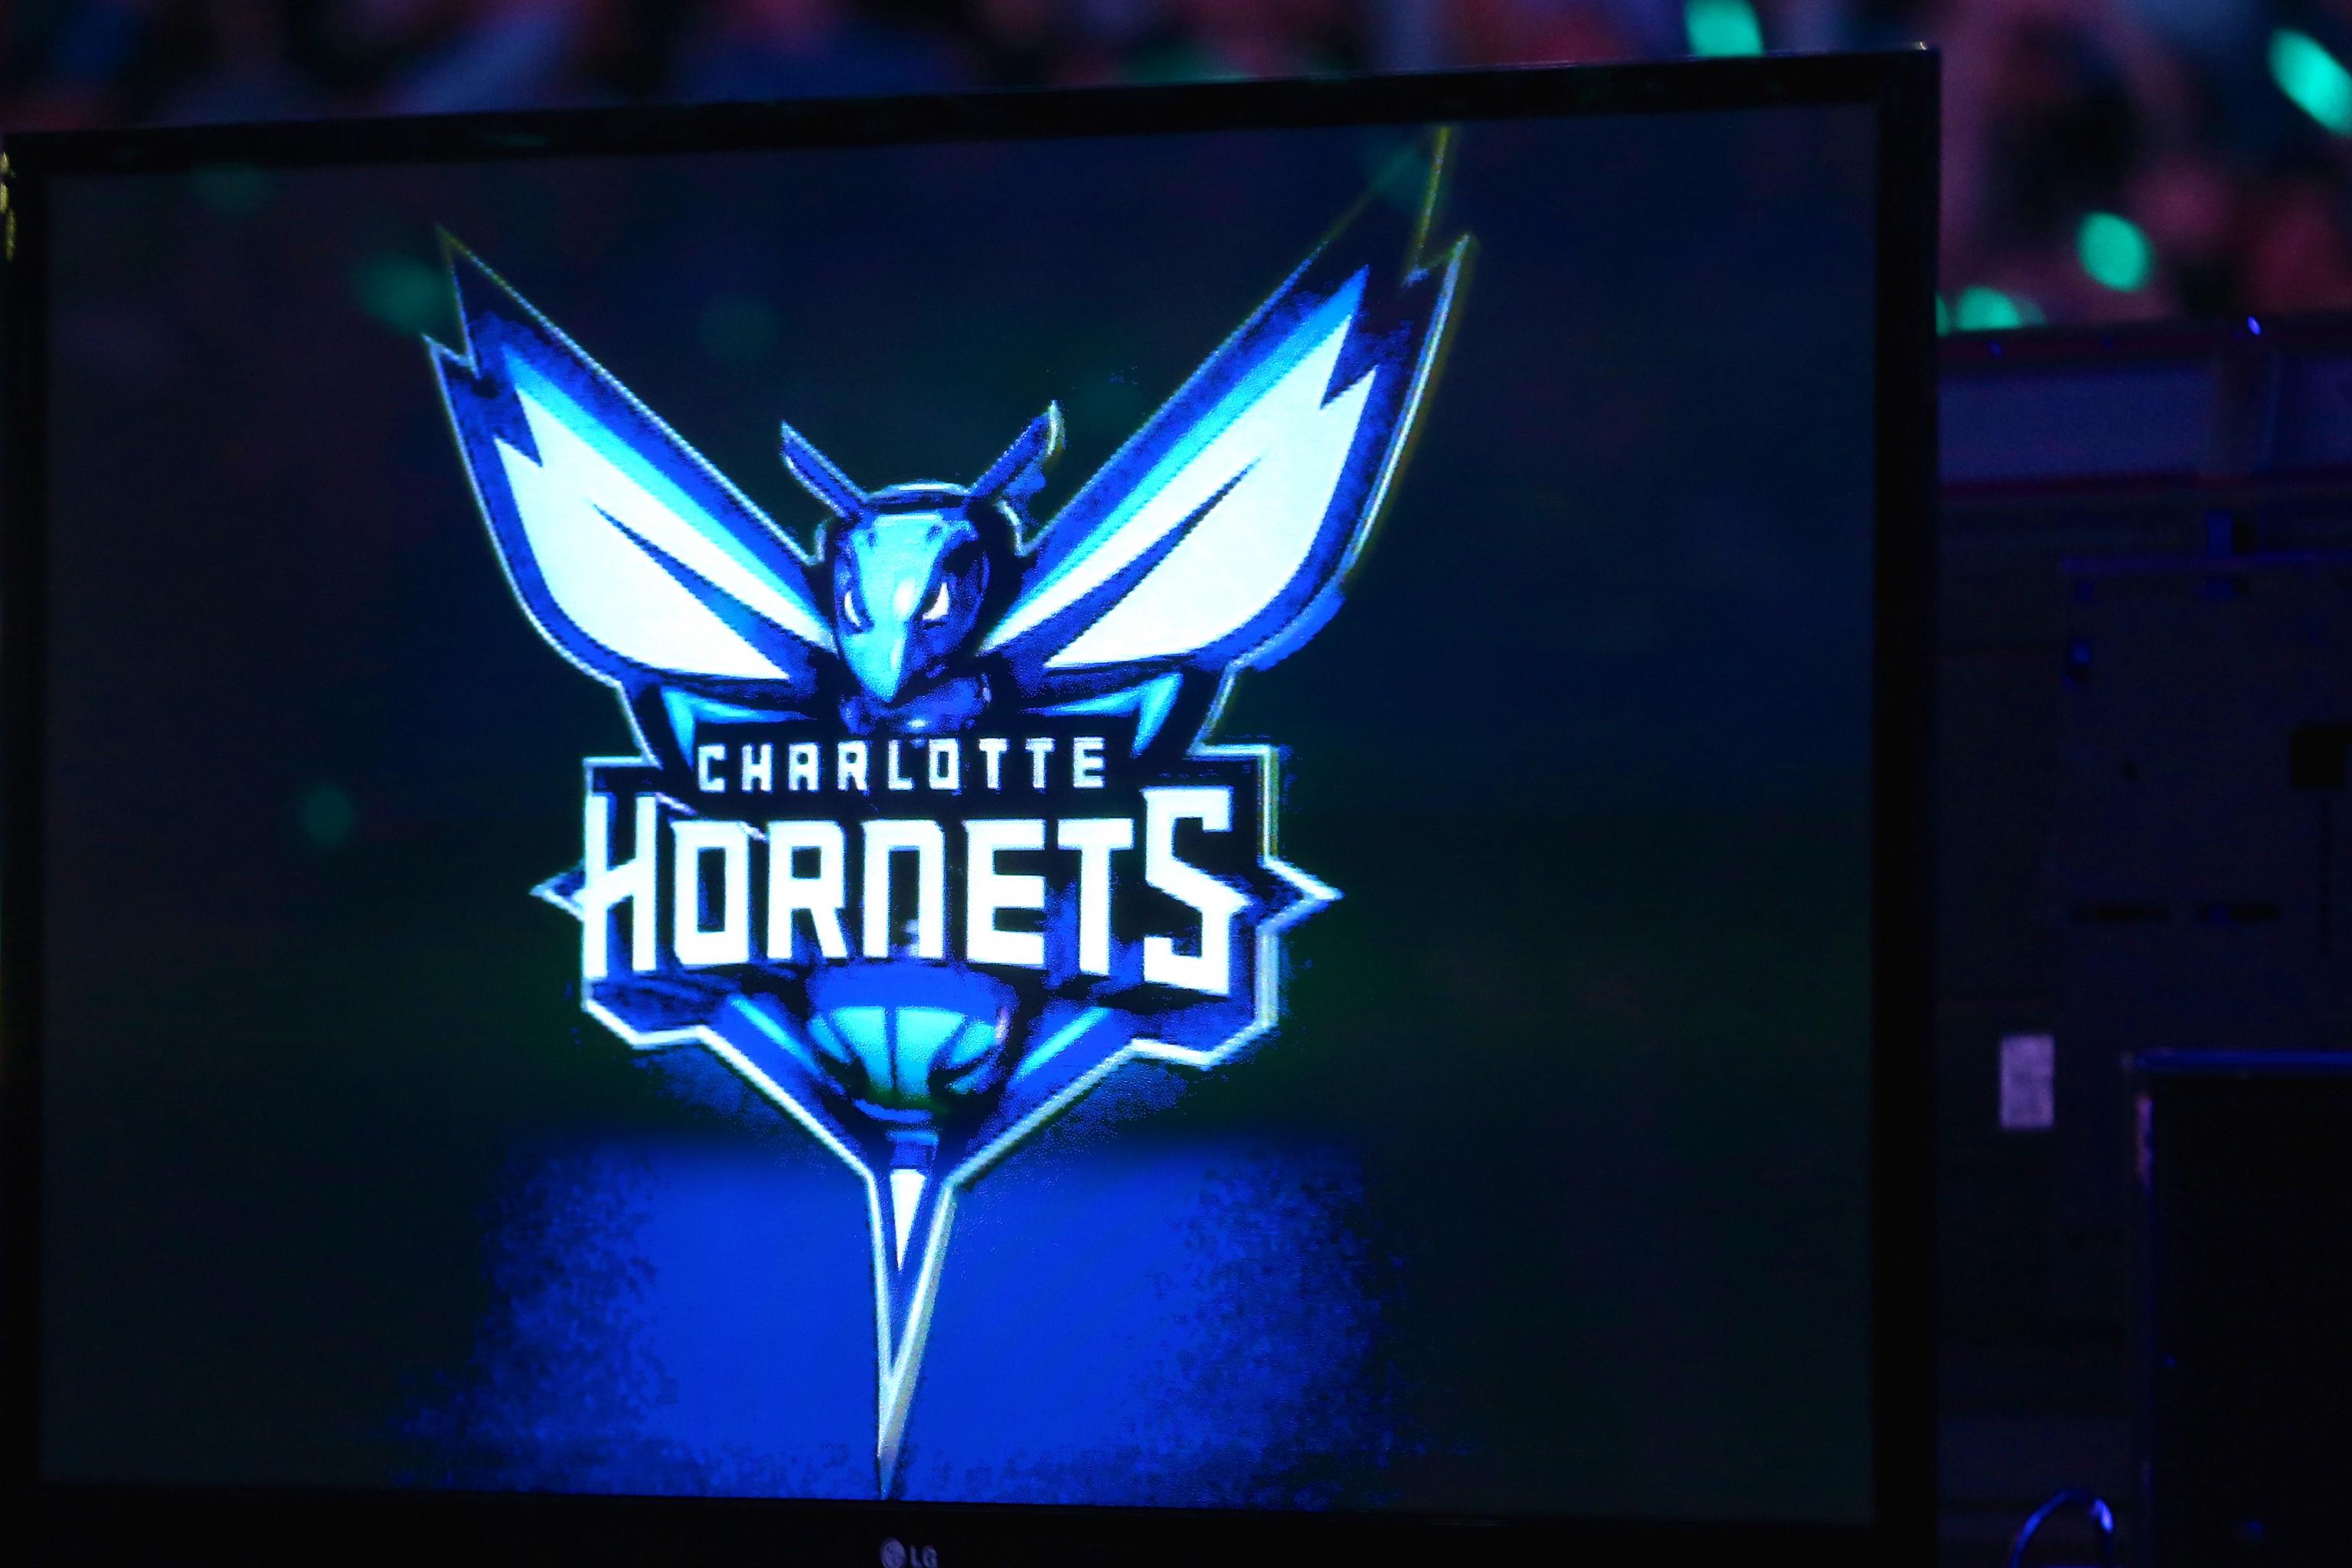 BREAKING: The Charlotte Hornets have unveiled their new 'City